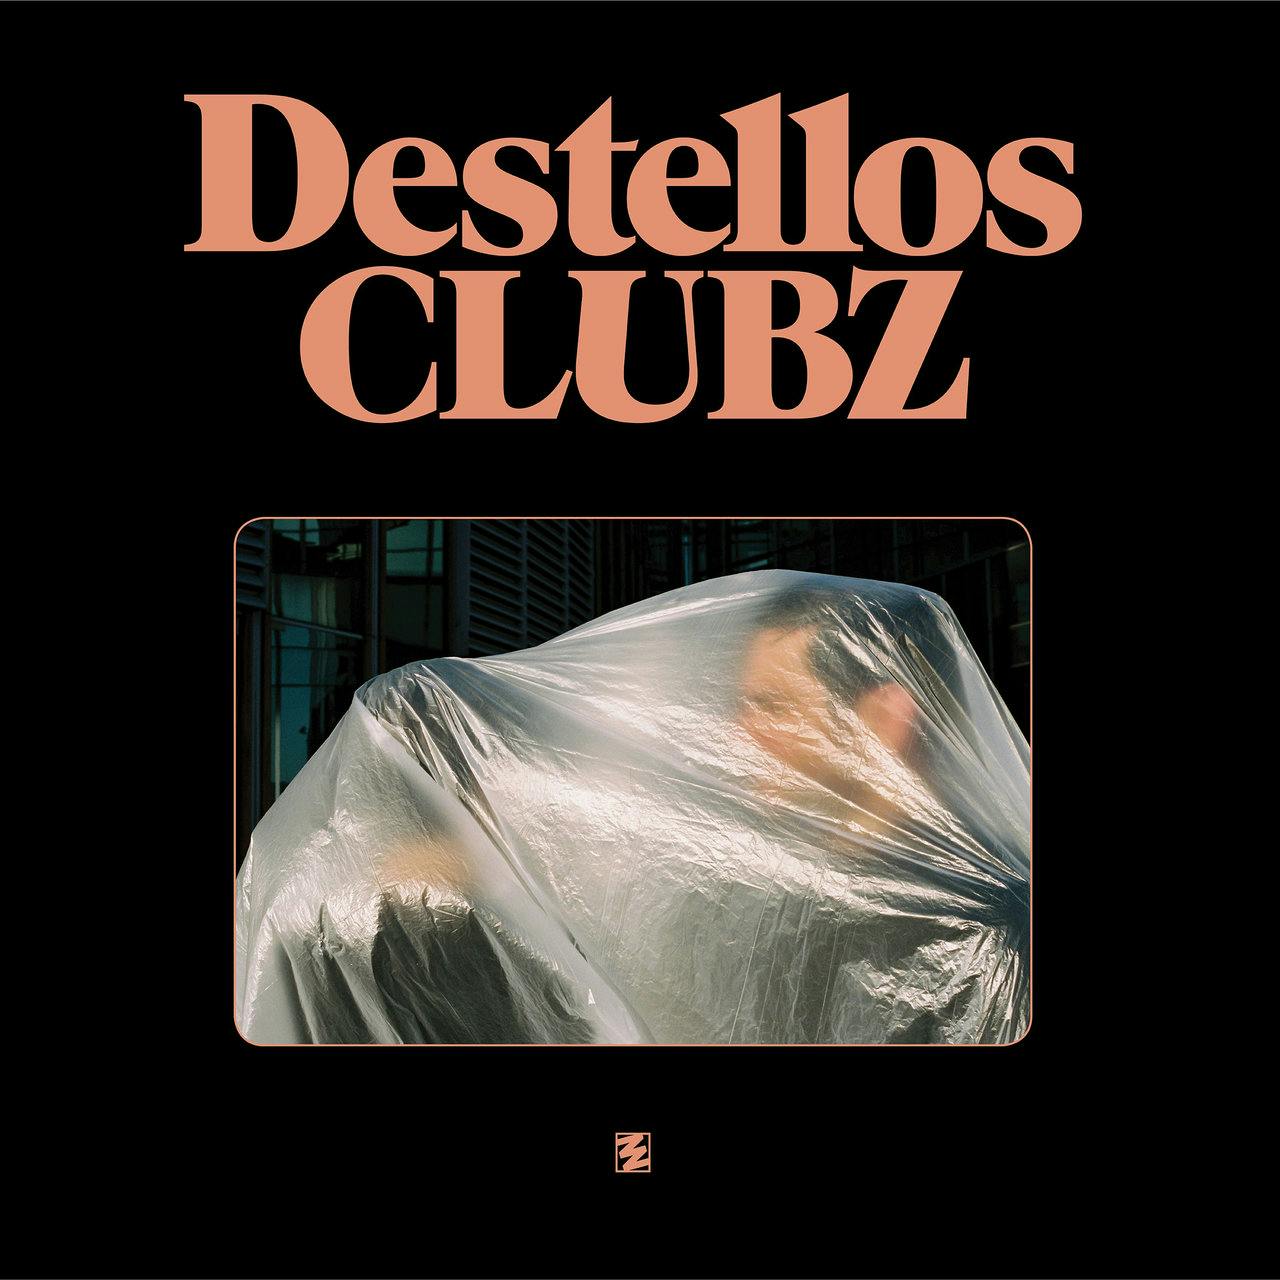 love this record. I first found out about Clubz through Youtube and their music videos and I really enjoyed their music. They have such a fresh sound and on top of their production, the songs are super catchy and very pop. Super danceable record. Some of my favorites off this one are Réplica and Popscuro. 